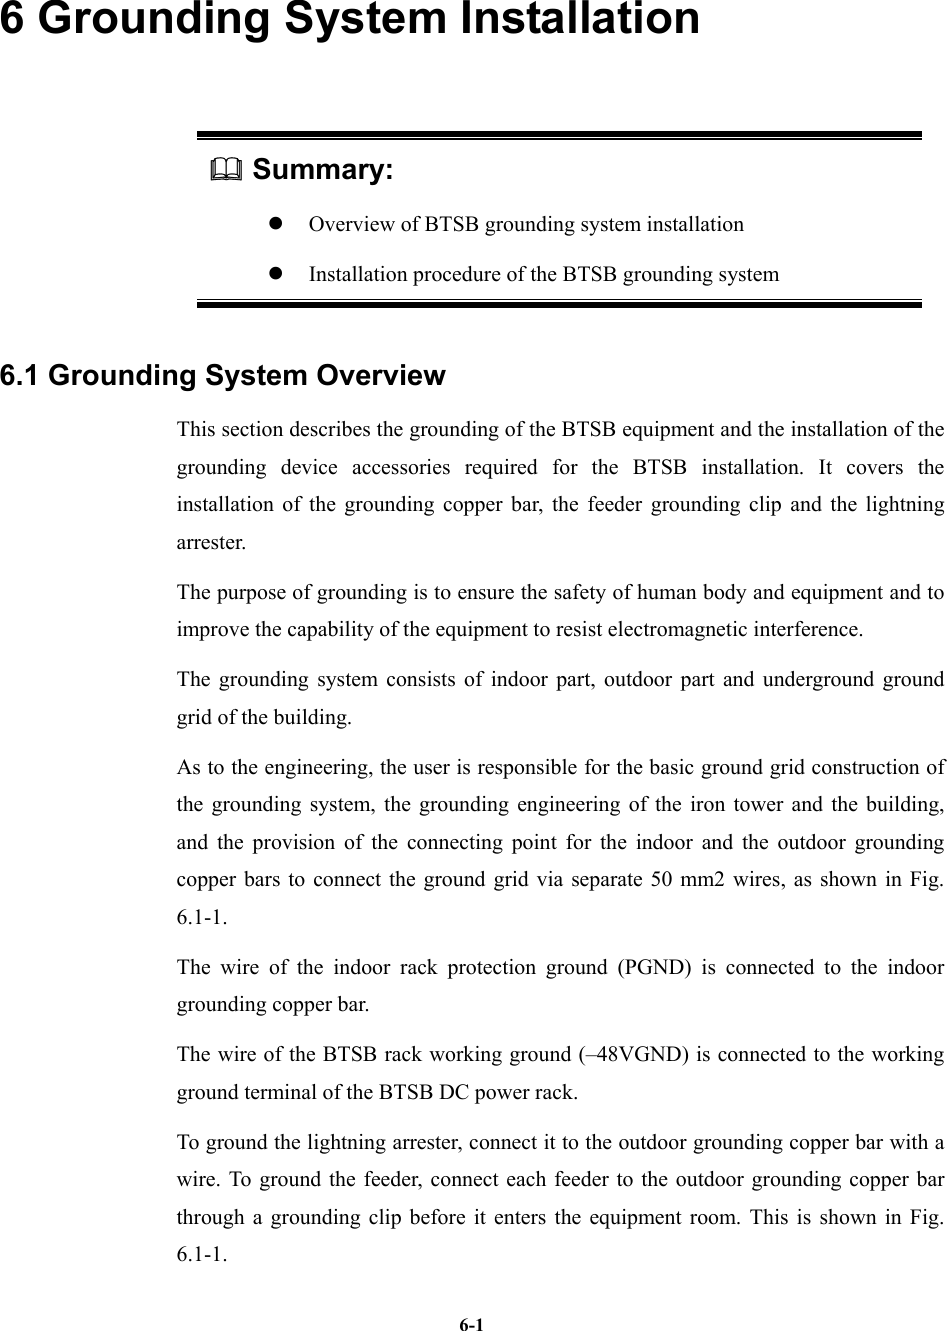   6-16 Grounding System Installation  Summary: z  Overview of BTSB grounding system installation   z  Installation procedure of the BTSB grounding system 6.1 Grounding System Overview This section describes the grounding of the BTSB equipment and the installation of the grounding device accessories required for the BTSB installation. It covers the installation of the grounding copper bar, the feeder grounding clip and the lightning arrester. The purpose of grounding is to ensure the safety of human body and equipment and to improve the capability of the equipment to resist electromagnetic interference. The grounding system consists of indoor part, outdoor part and underground ground grid of the building. As to the engineering, the user is responsible for the basic ground grid construction of the grounding system, the grounding engineering of the iron tower and the building, and the provision of the connecting point for the indoor and the outdoor grounding copper bars to connect the ground grid via separate 50 mm2 wires, as shown in Fig. 6.1-1. The wire of the indoor rack protection ground (PGND) is connected to the indoor grounding copper bar.   The wire of the BTSB rack working ground (–48VGND) is connected to the working ground terminal of the BTSB DC power rack. To ground the lightning arrester, connect it to the outdoor grounding copper bar with a wire. To ground the feeder, connect each feeder to the outdoor grounding copper bar through a grounding clip before it enters the equipment room. This is shown in Fig. 6.1-1. 